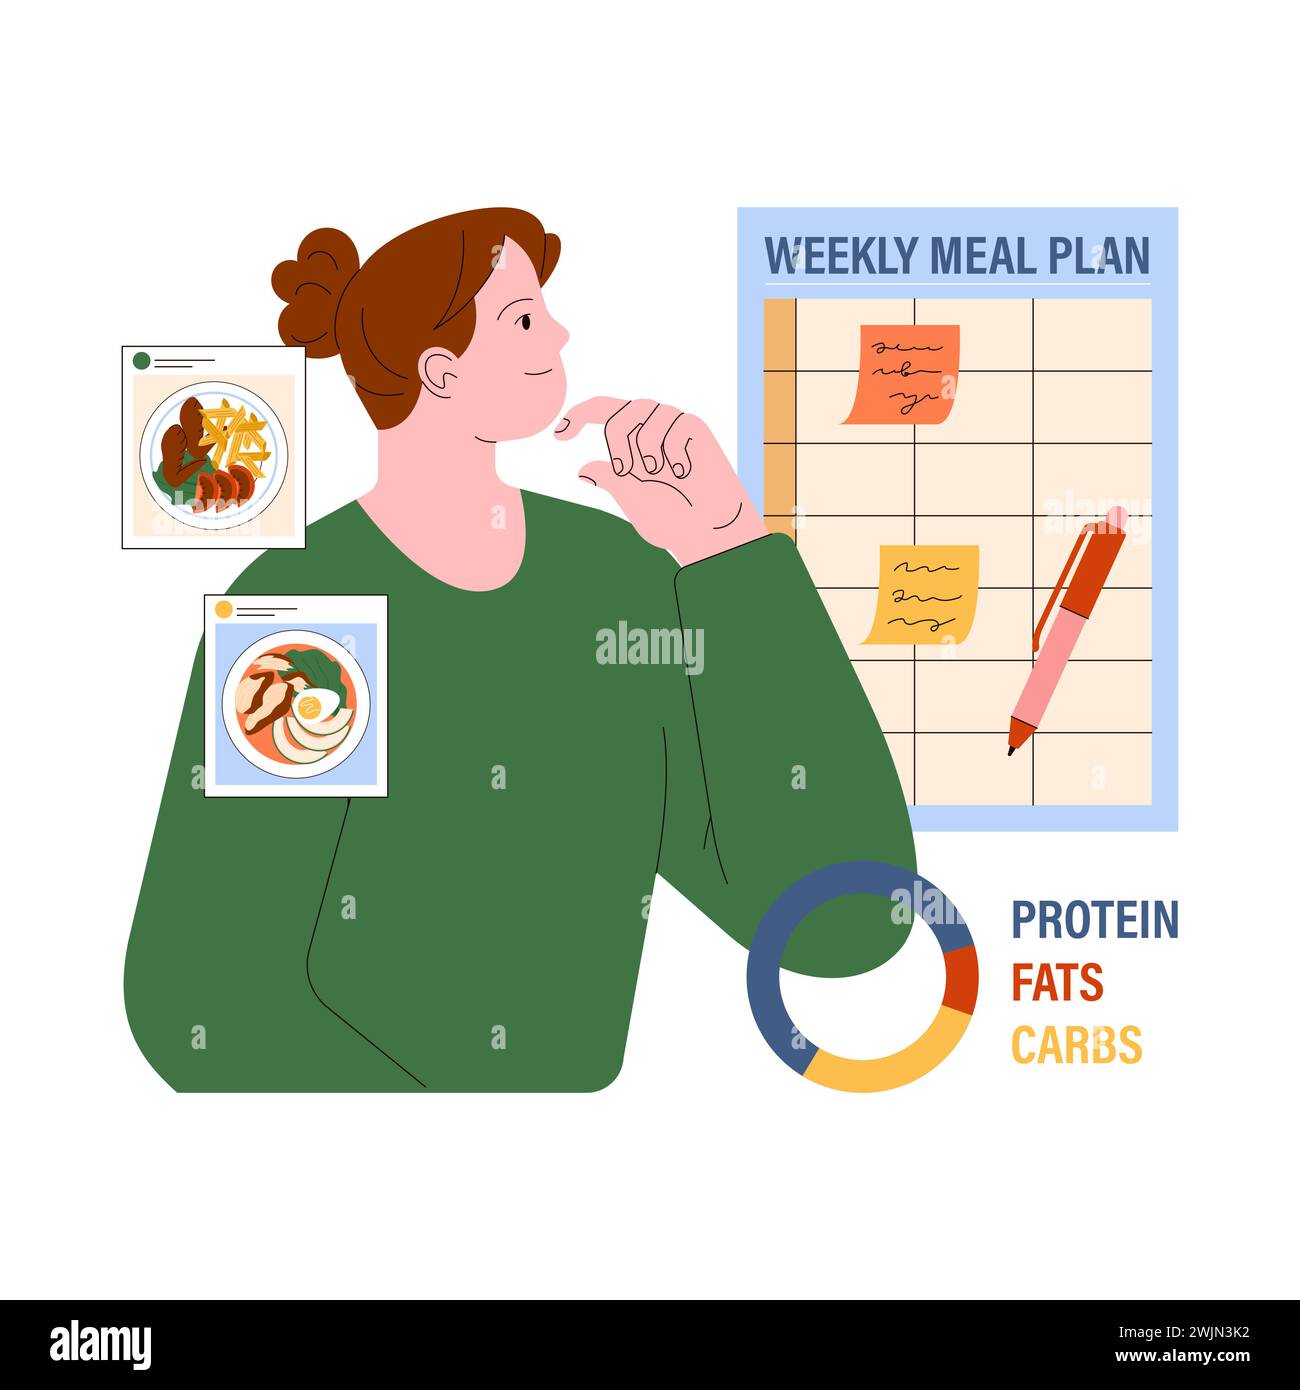 Meal planning. Woman contemplates a balanced diet with a weekly meal plan chart, aiming to reduce food waste. Flat vector illustration. Stock Vector